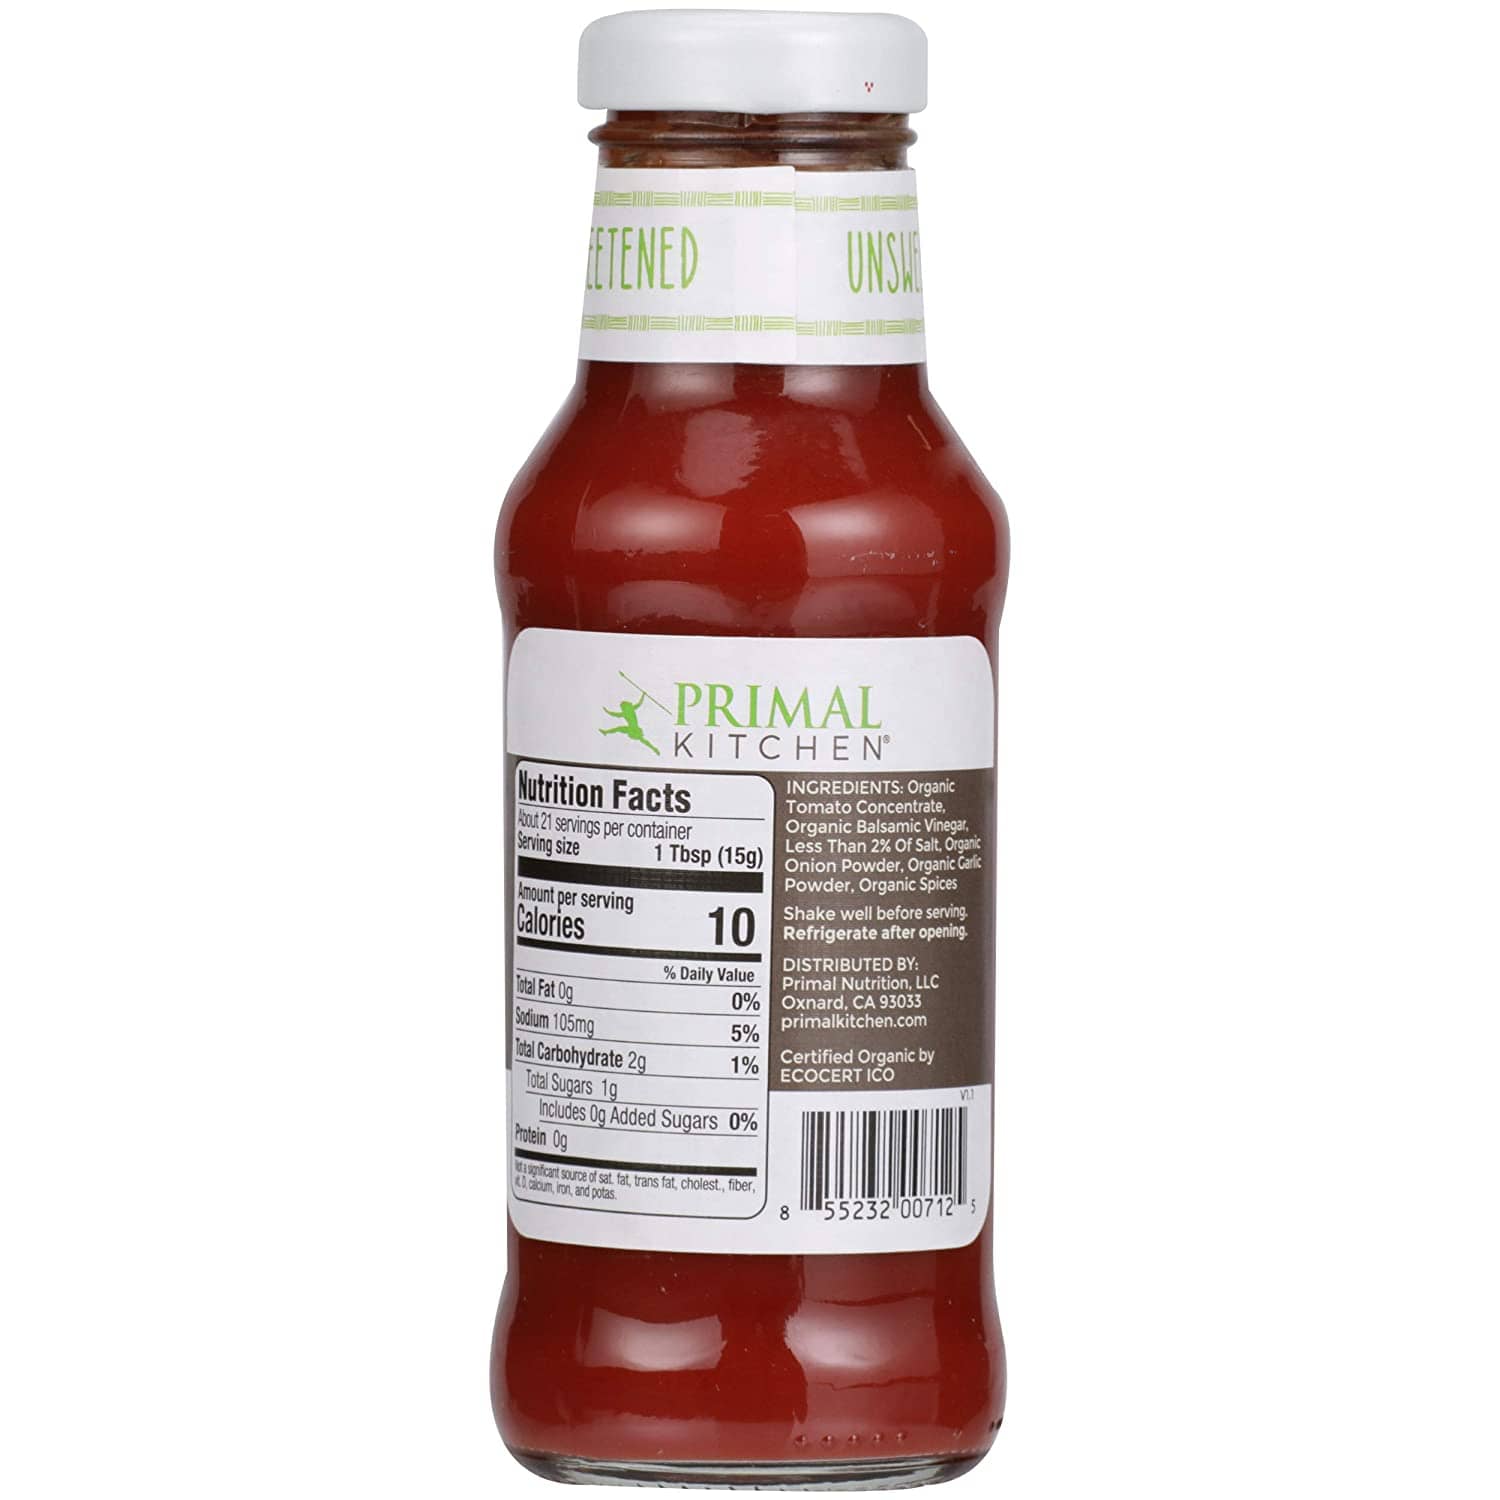 Primal Kitchen Organic and Unsweetened Ketchup - Condiments